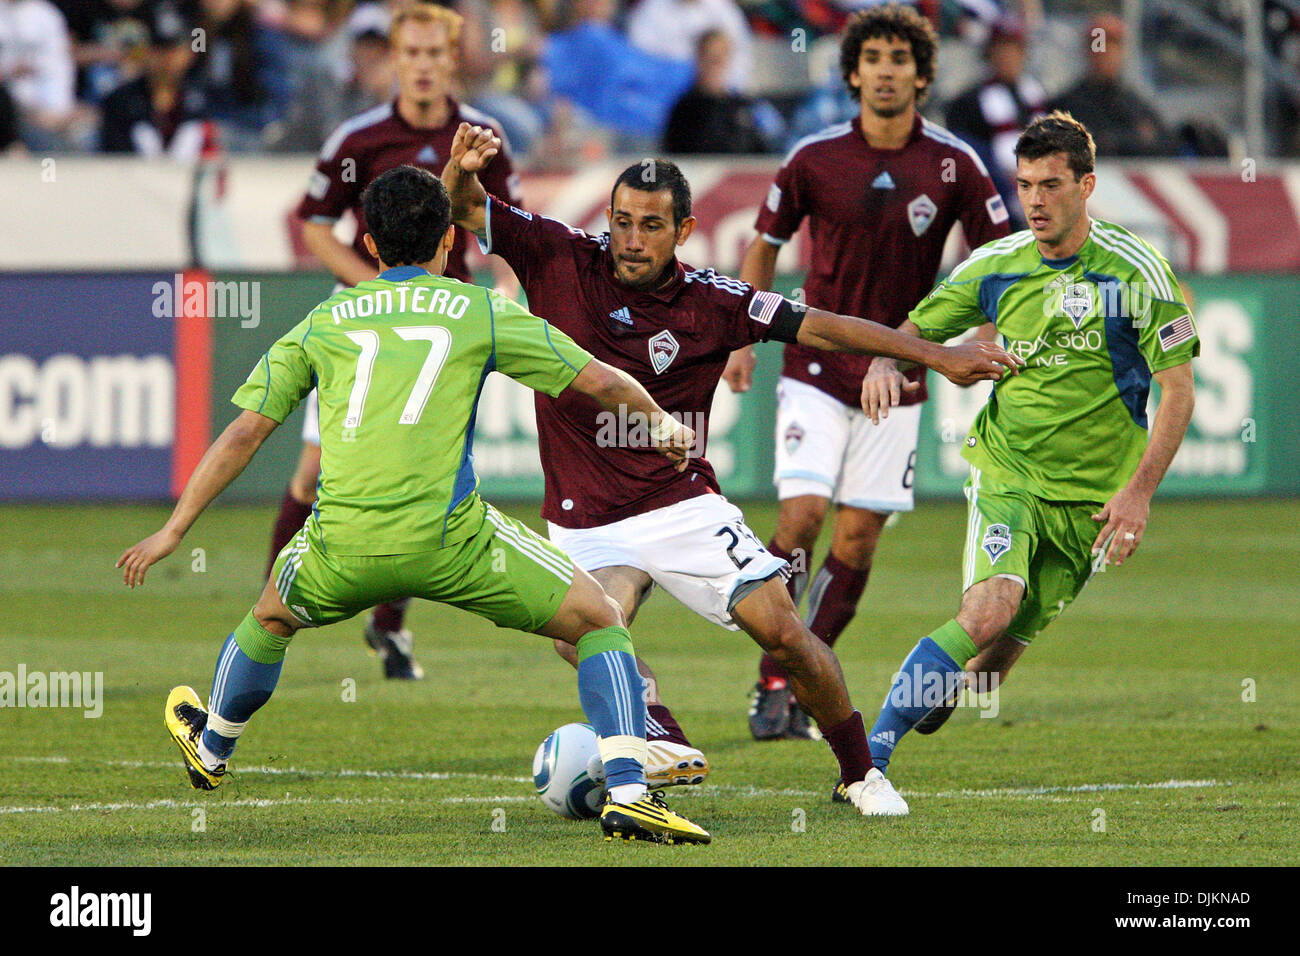 Colorado Rapids midfielder Pablo Mastroeni (25) tries to get by Seattle forward Fredy Montero during the first half at Dick's Sporting Goods Park, Commerce City, Colorado. (Credit Image: © Paul Meyer/Southcreek Global/ZUMApress.com) Stock Photo